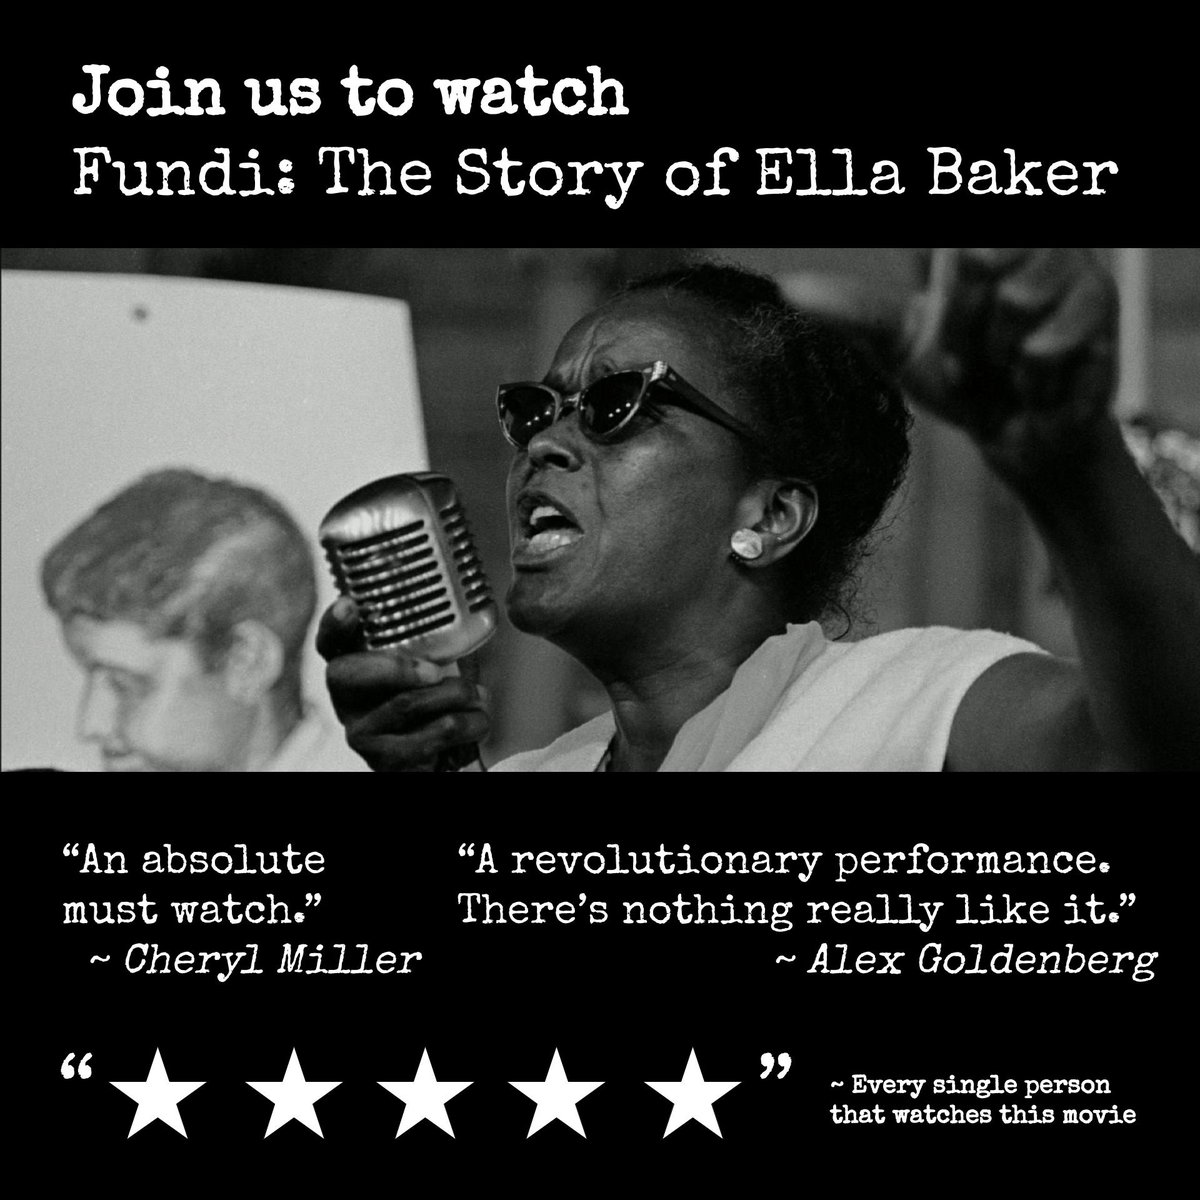 Join us at 602 E 61st on Friday, April 12th, at 5:30 PM for a screening of Fundi: The Story of Ella Baker. This documentary presents the instrumental role that Ella Baker, a friend and advisor to Dr. Martin Luther King, played in shaping the American Civil Rights Movement.